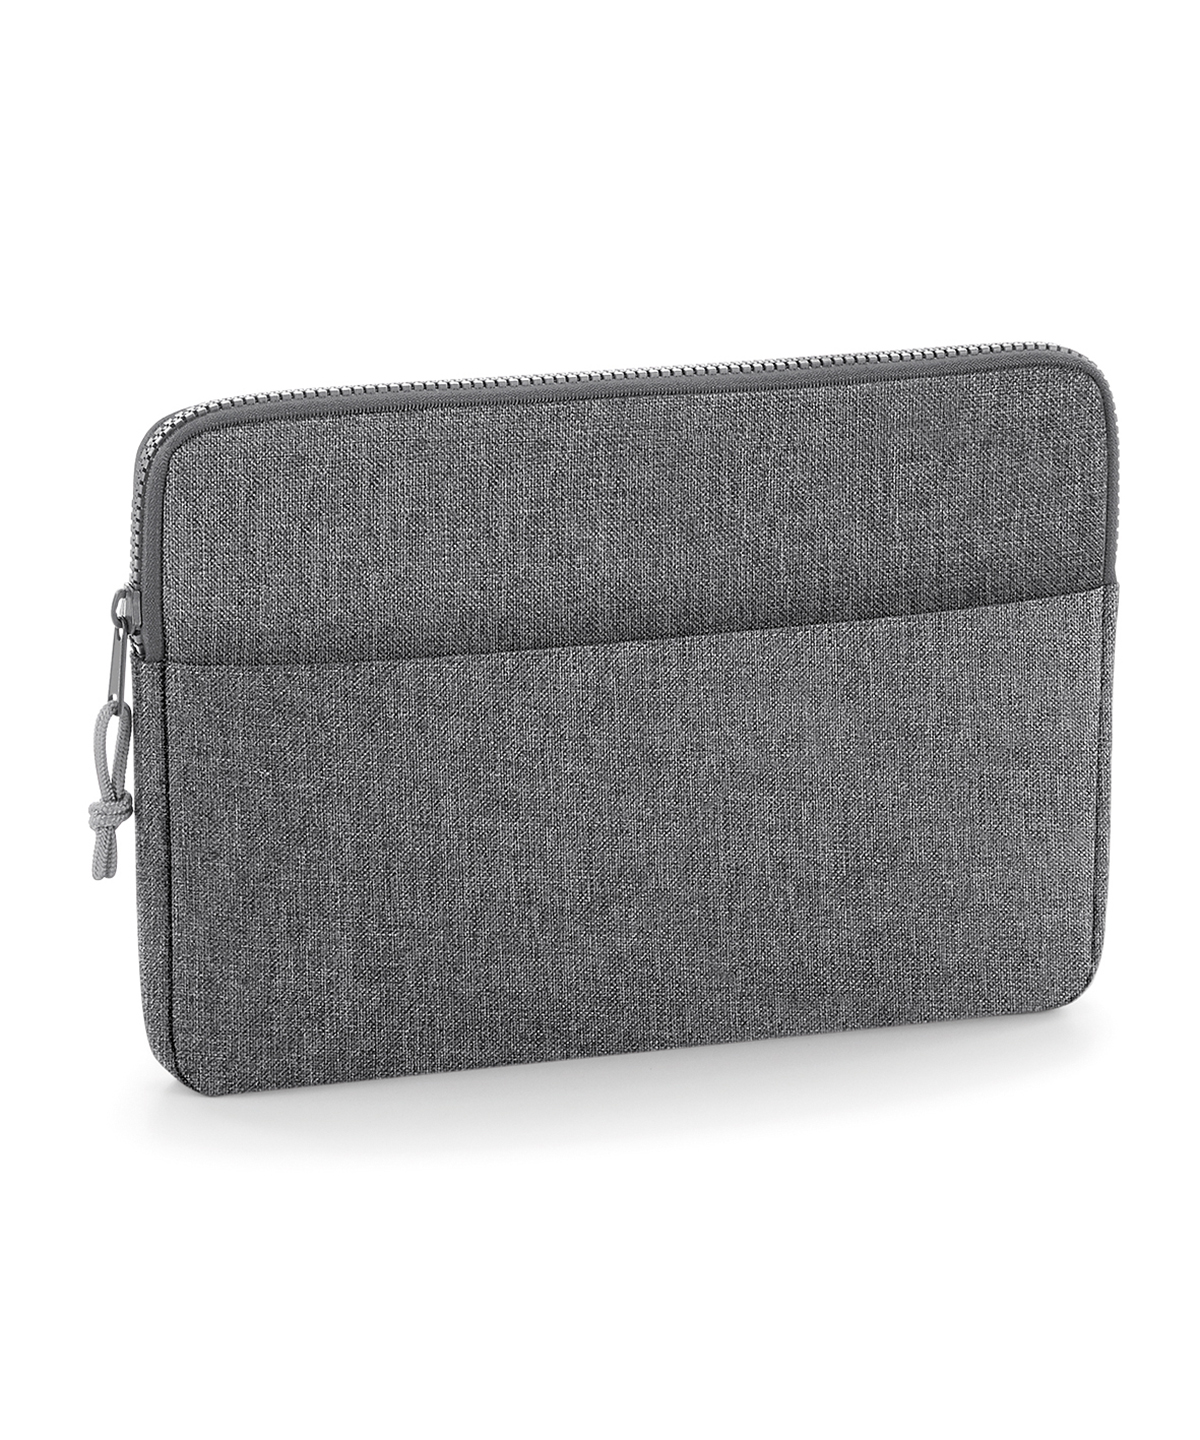 Essential 15" Laptop Case Grey Marl Size One Size